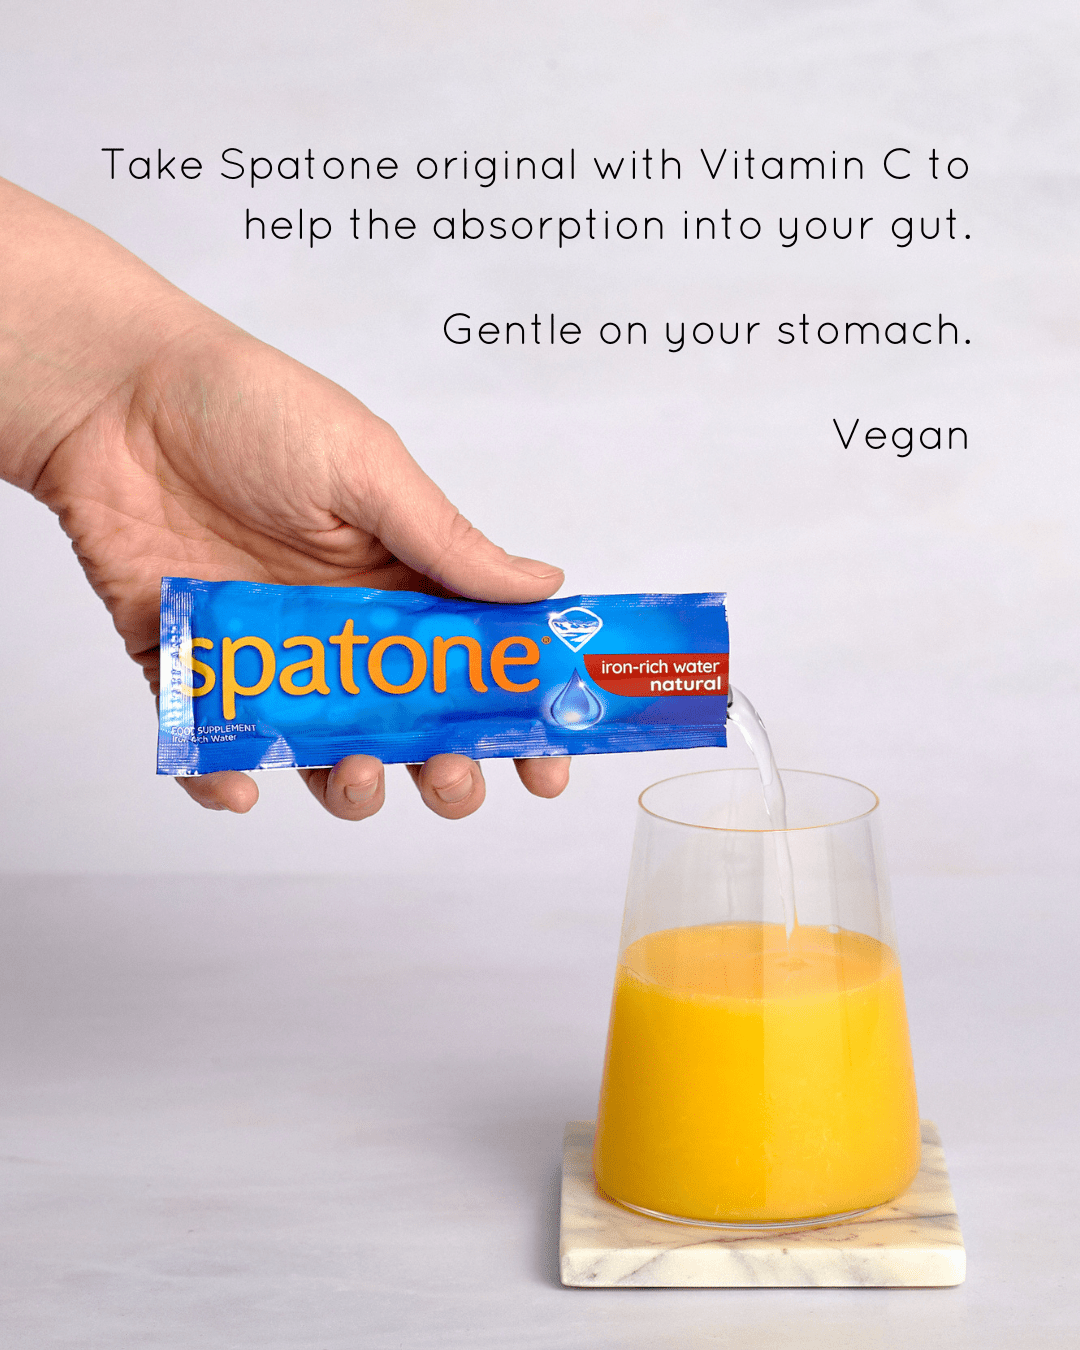 Infographic showing a glass of orange juice and a hand adding one Spatone Sachet and on the top  says" Take Spatone original with Vitamin C to help the absorption into your gut, Gently on your stomach, Vegan"